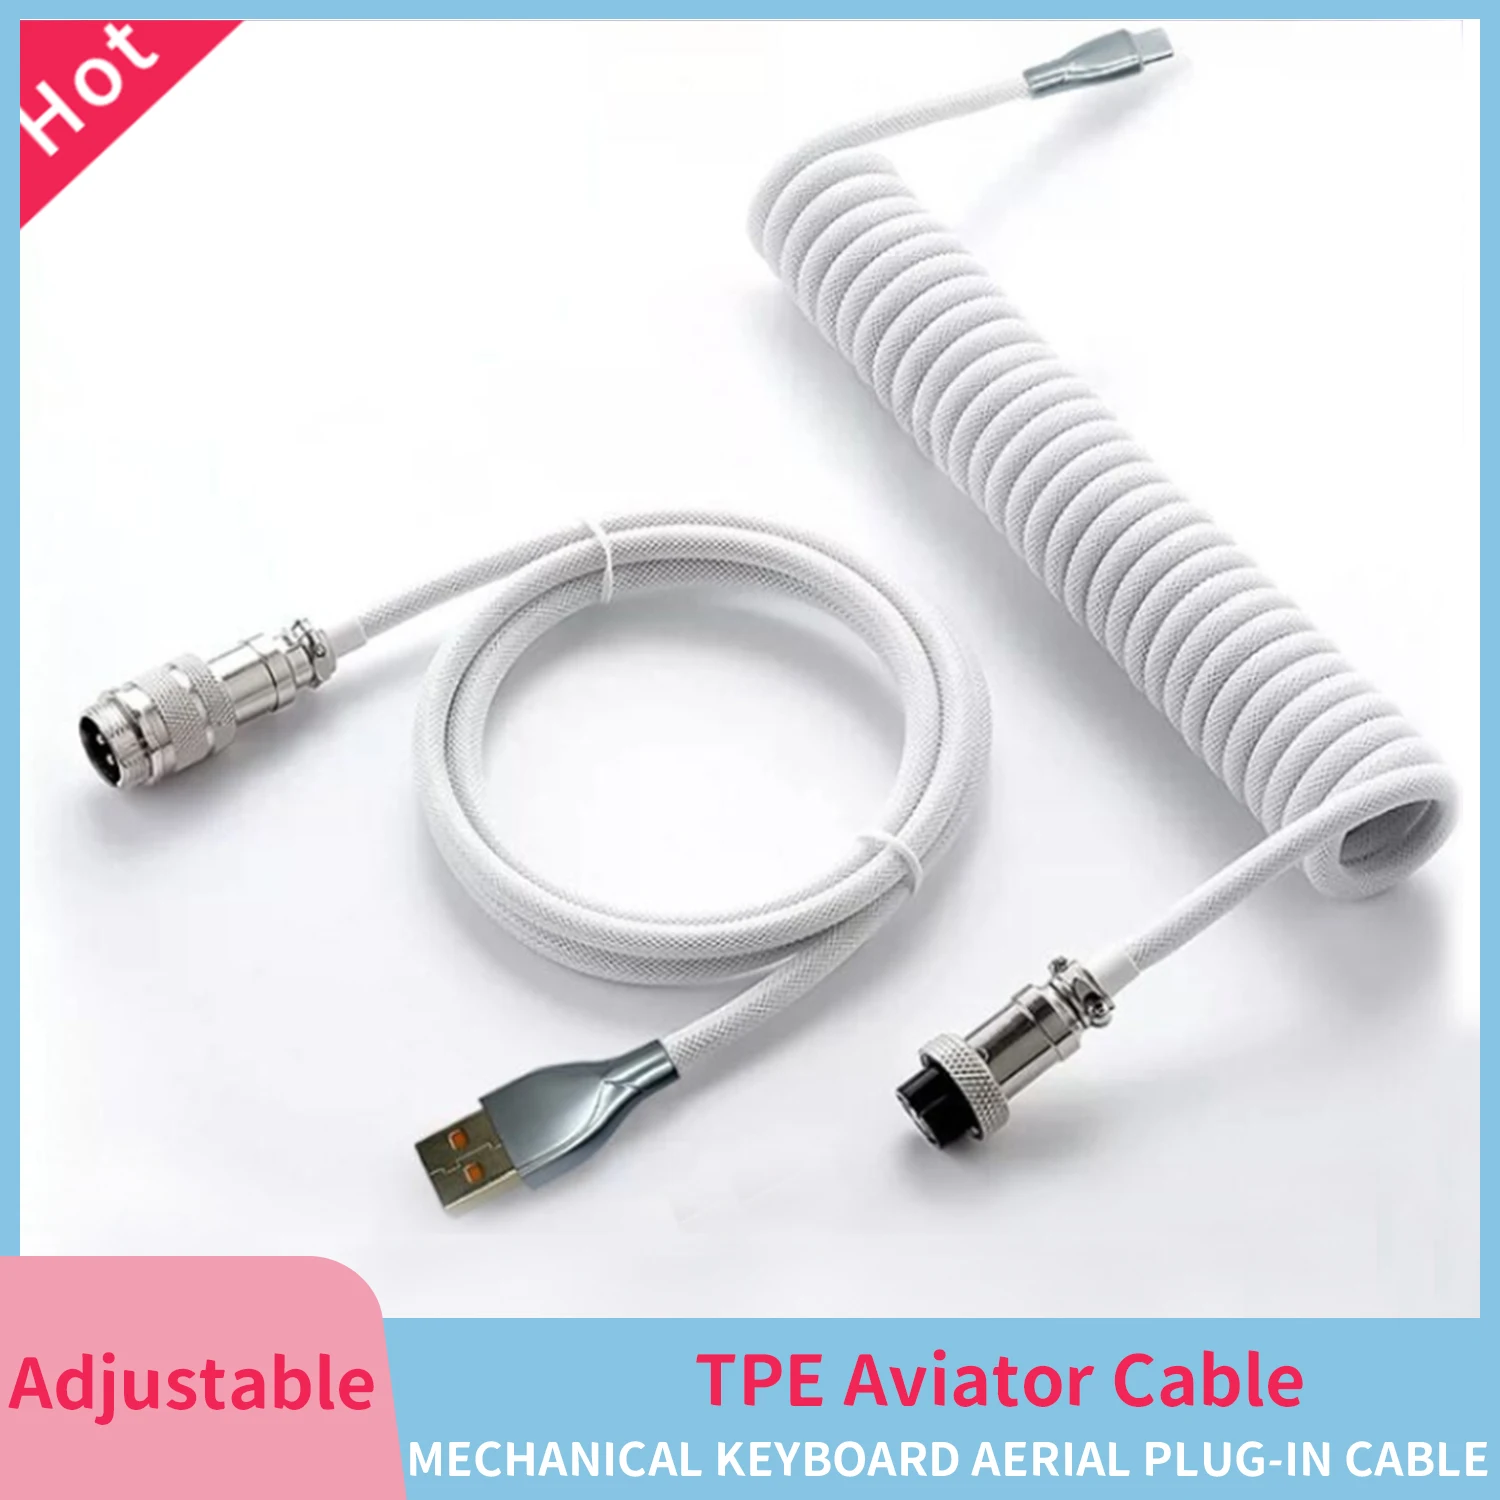 New Coiled Cable Type C Mechanical Keyboard Wire USB Cable Mechanical Keyboard Aviator Desktop Computer Aviation Connector